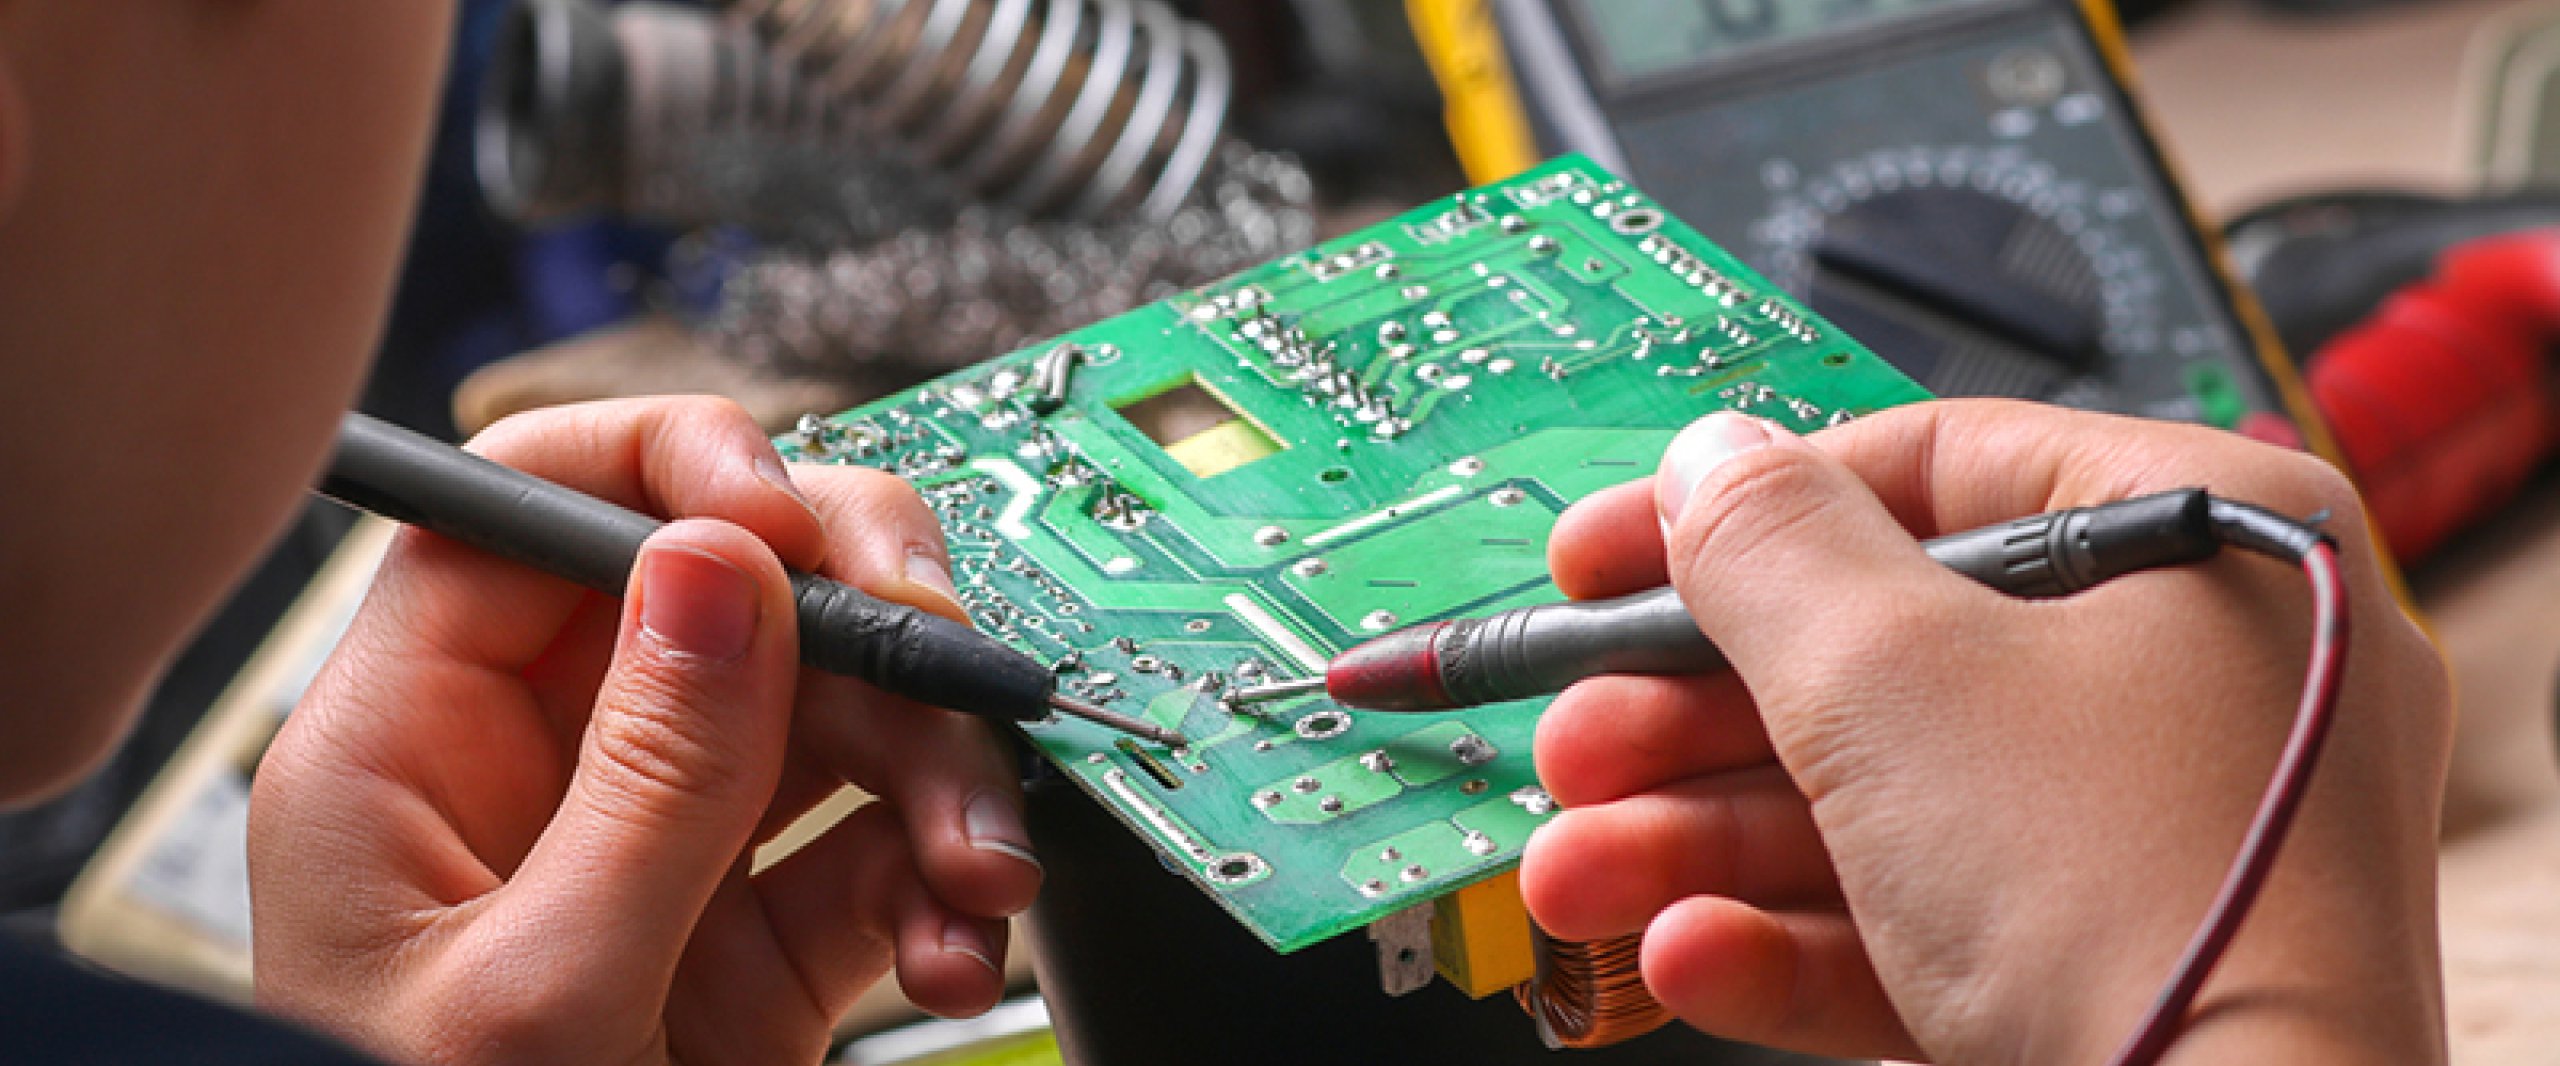 Repair of electronic devices, tin soldering parts_Quelle: shutterstock_tcsaba_730471276